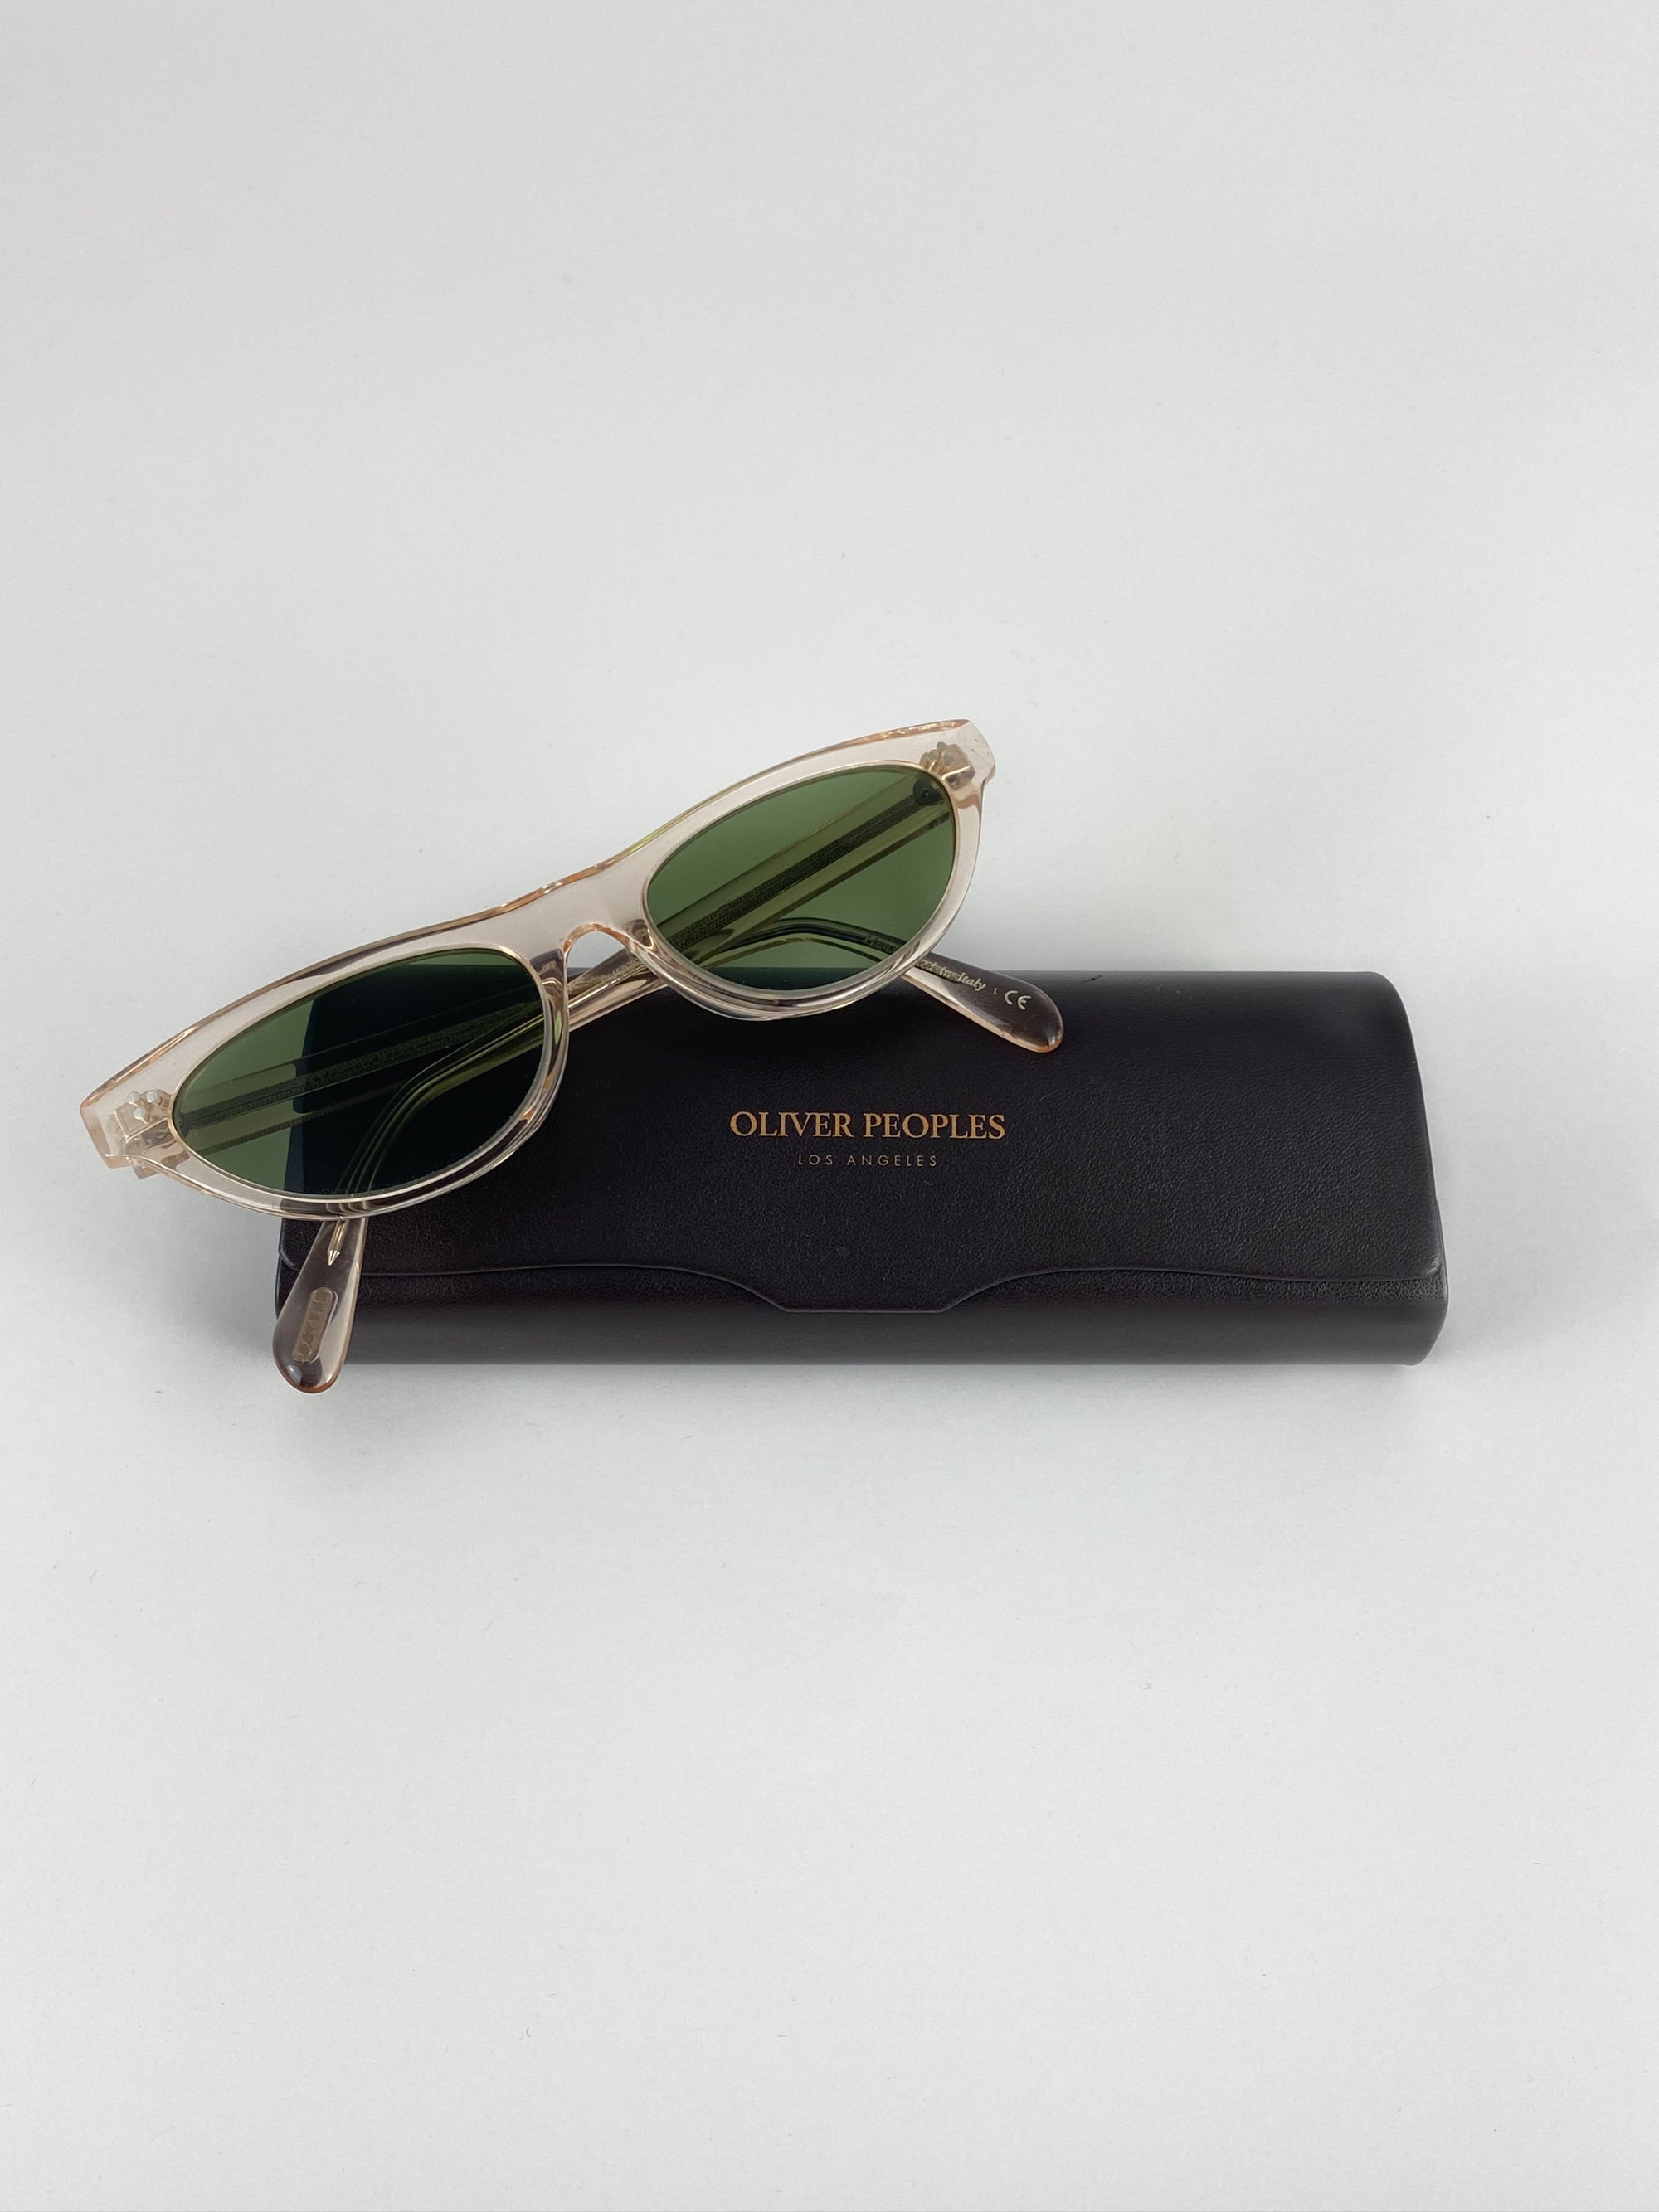 Oliver Peoples Cat Sunglasses see through + green glasses